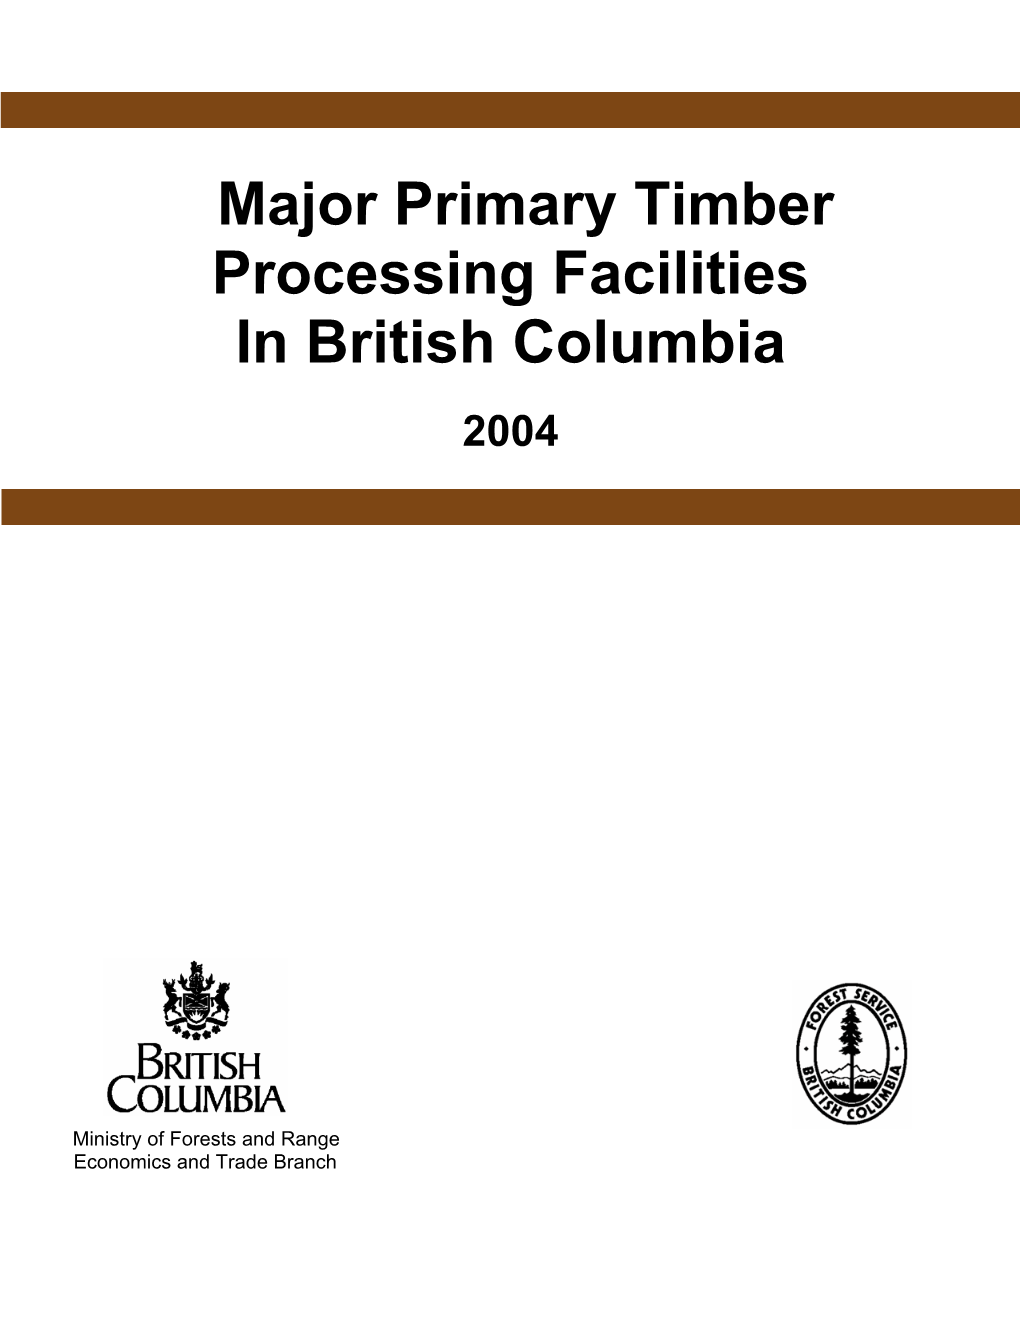 Major Primary Timber Processing Facilities in British Columbia 2004